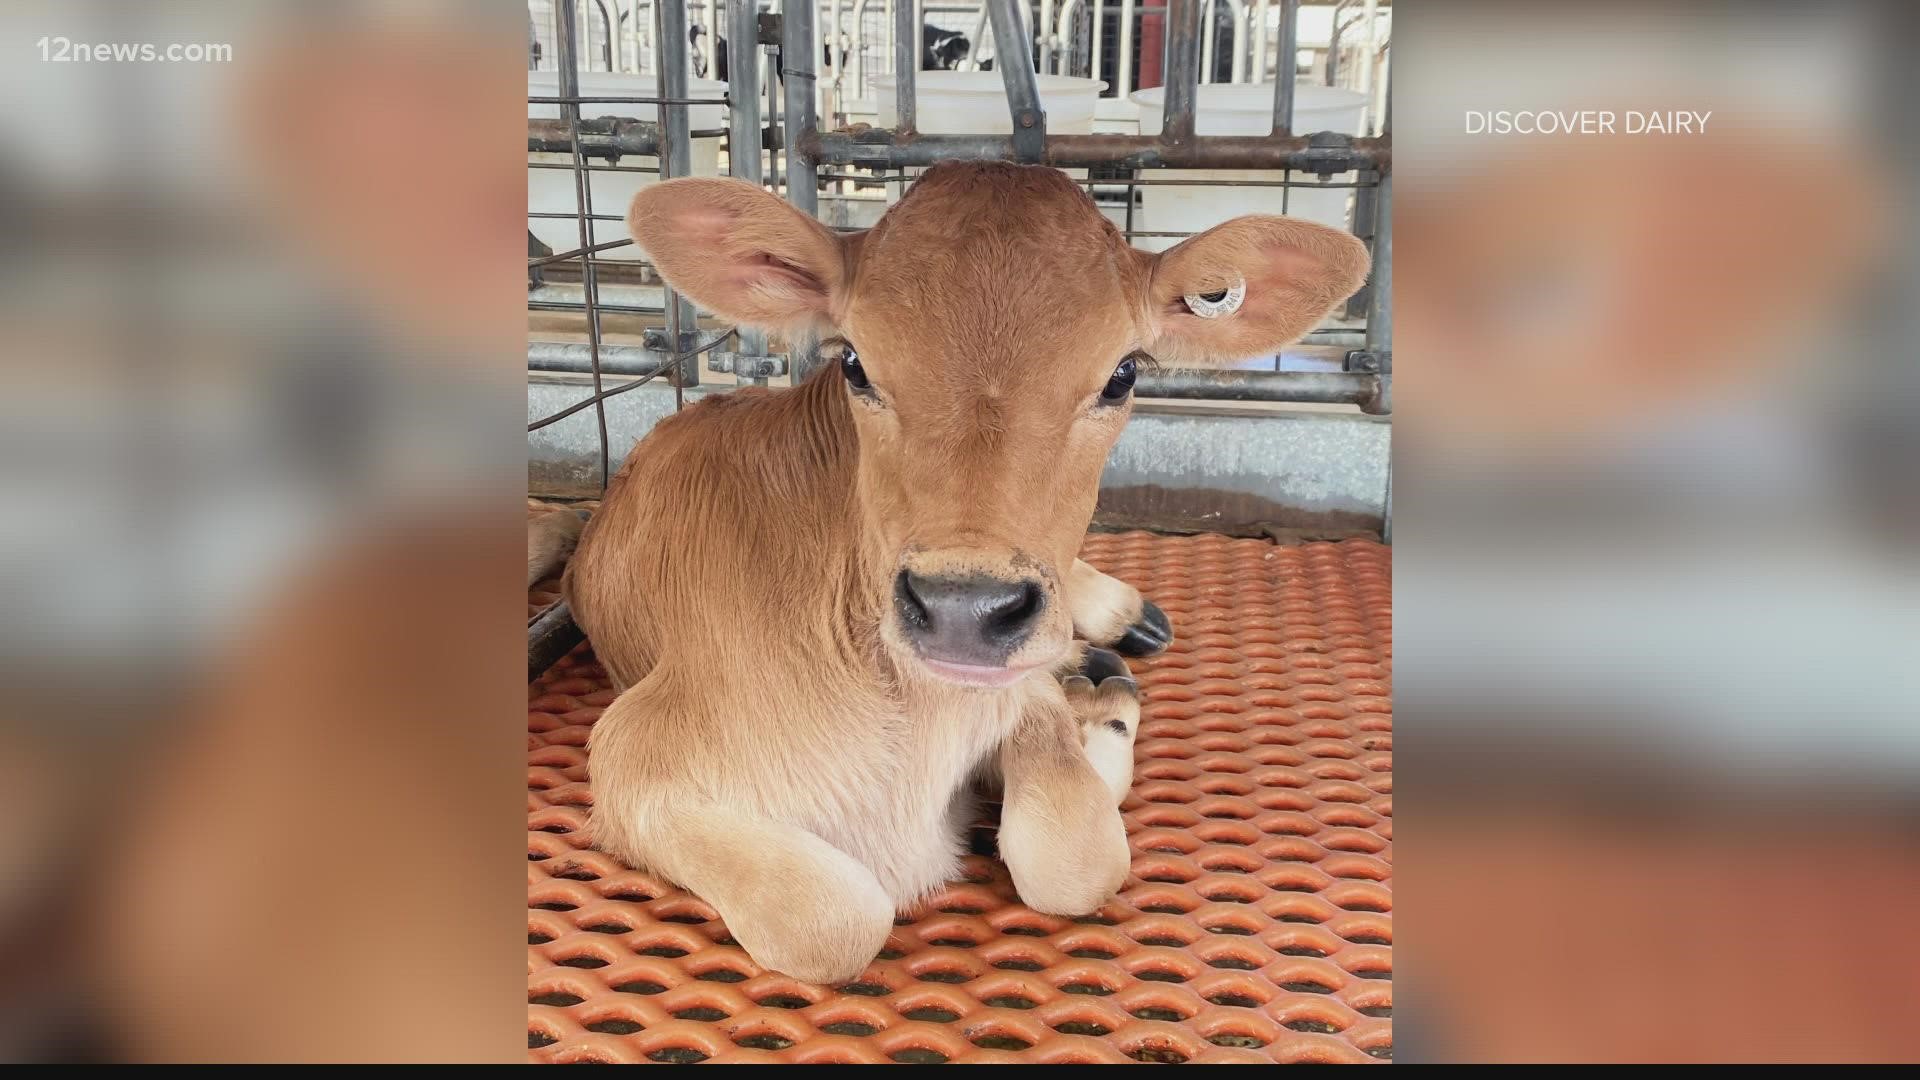 We adopted the cow back in September when she was first born through Stotz Farms's educational program. Here is her first update!